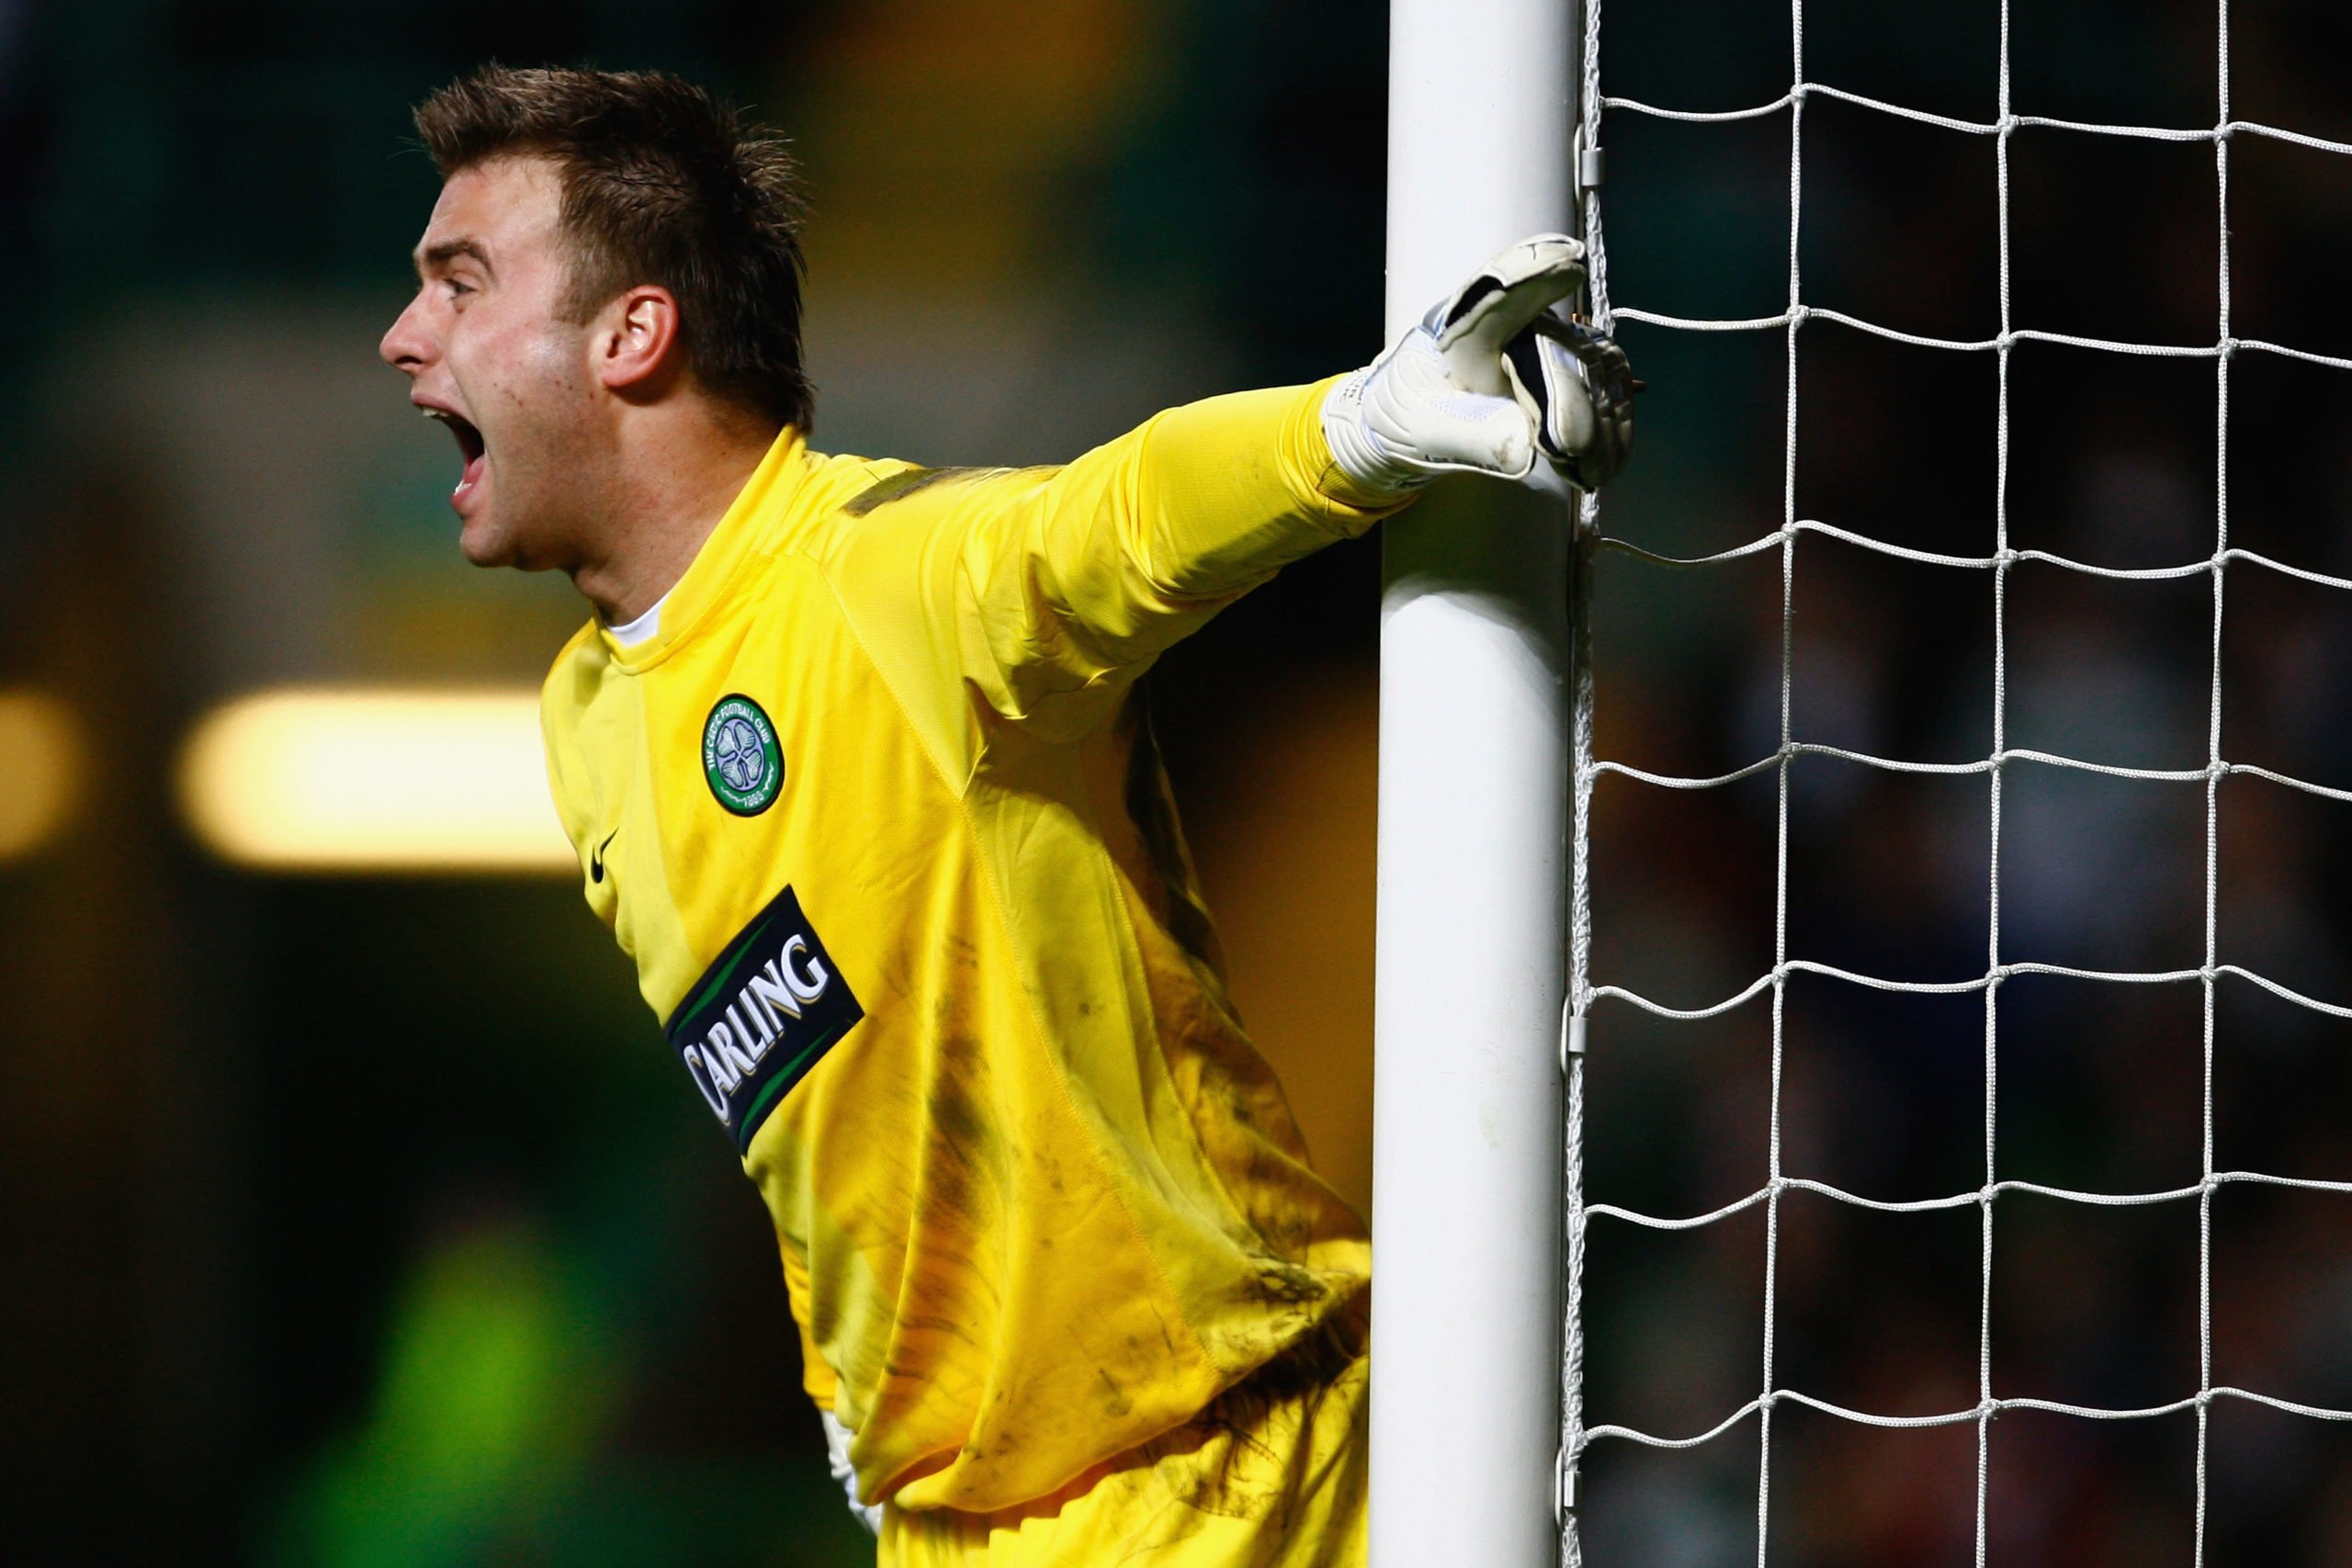 Long-standing Howe association with Boruc has some Celtic fans dreaming